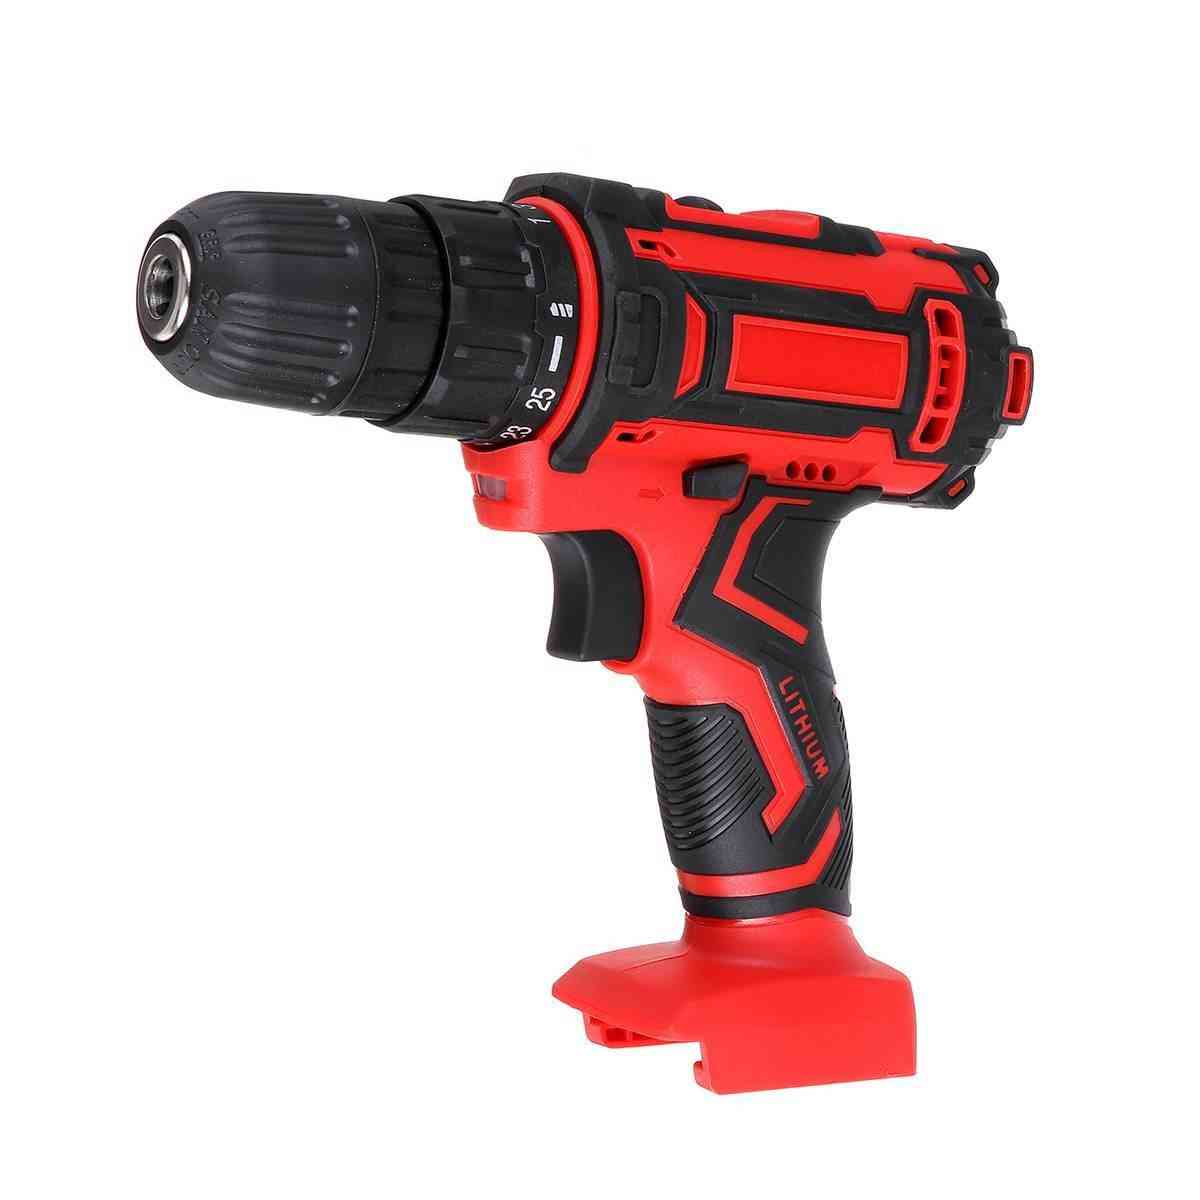 Cordless Electric Screwdriver, Hammer Drill